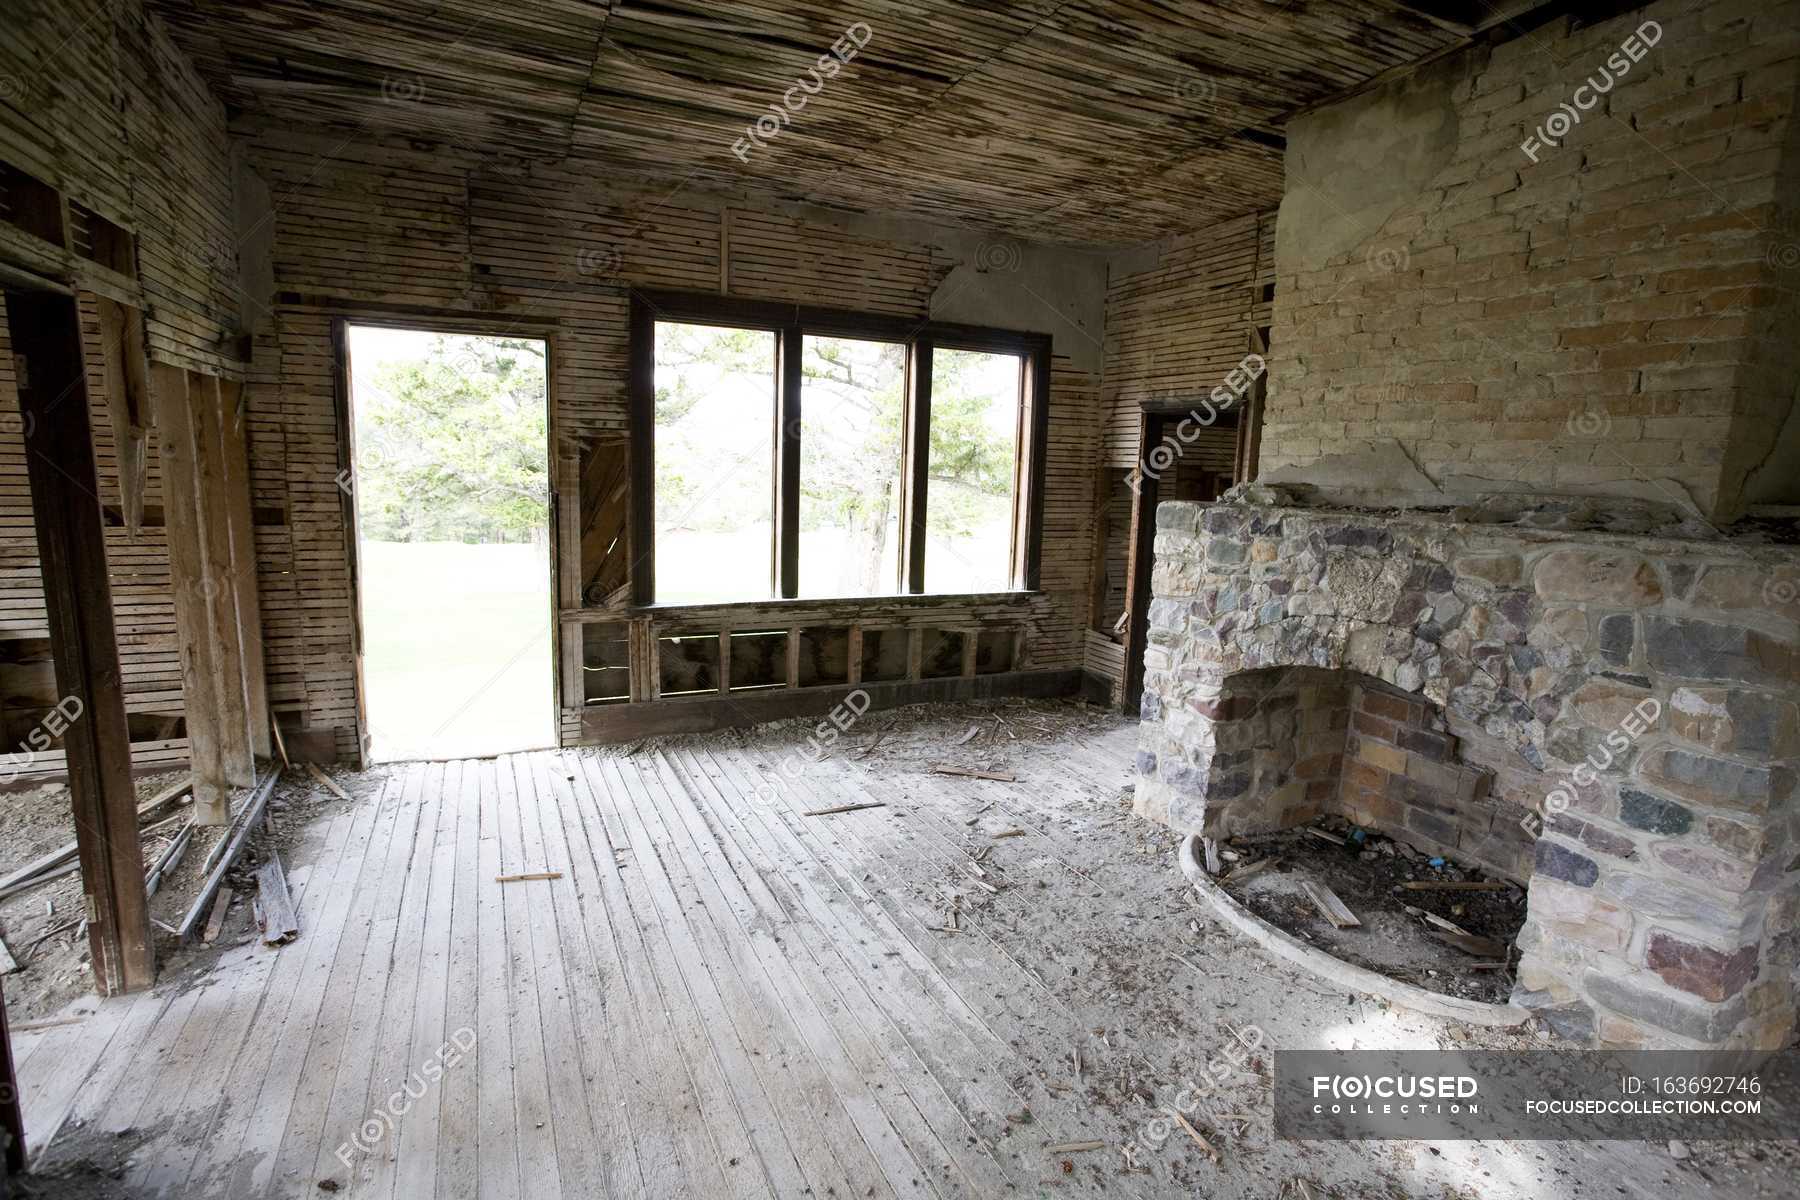 Abandoned House with empty room — Stock Photo | #163692746